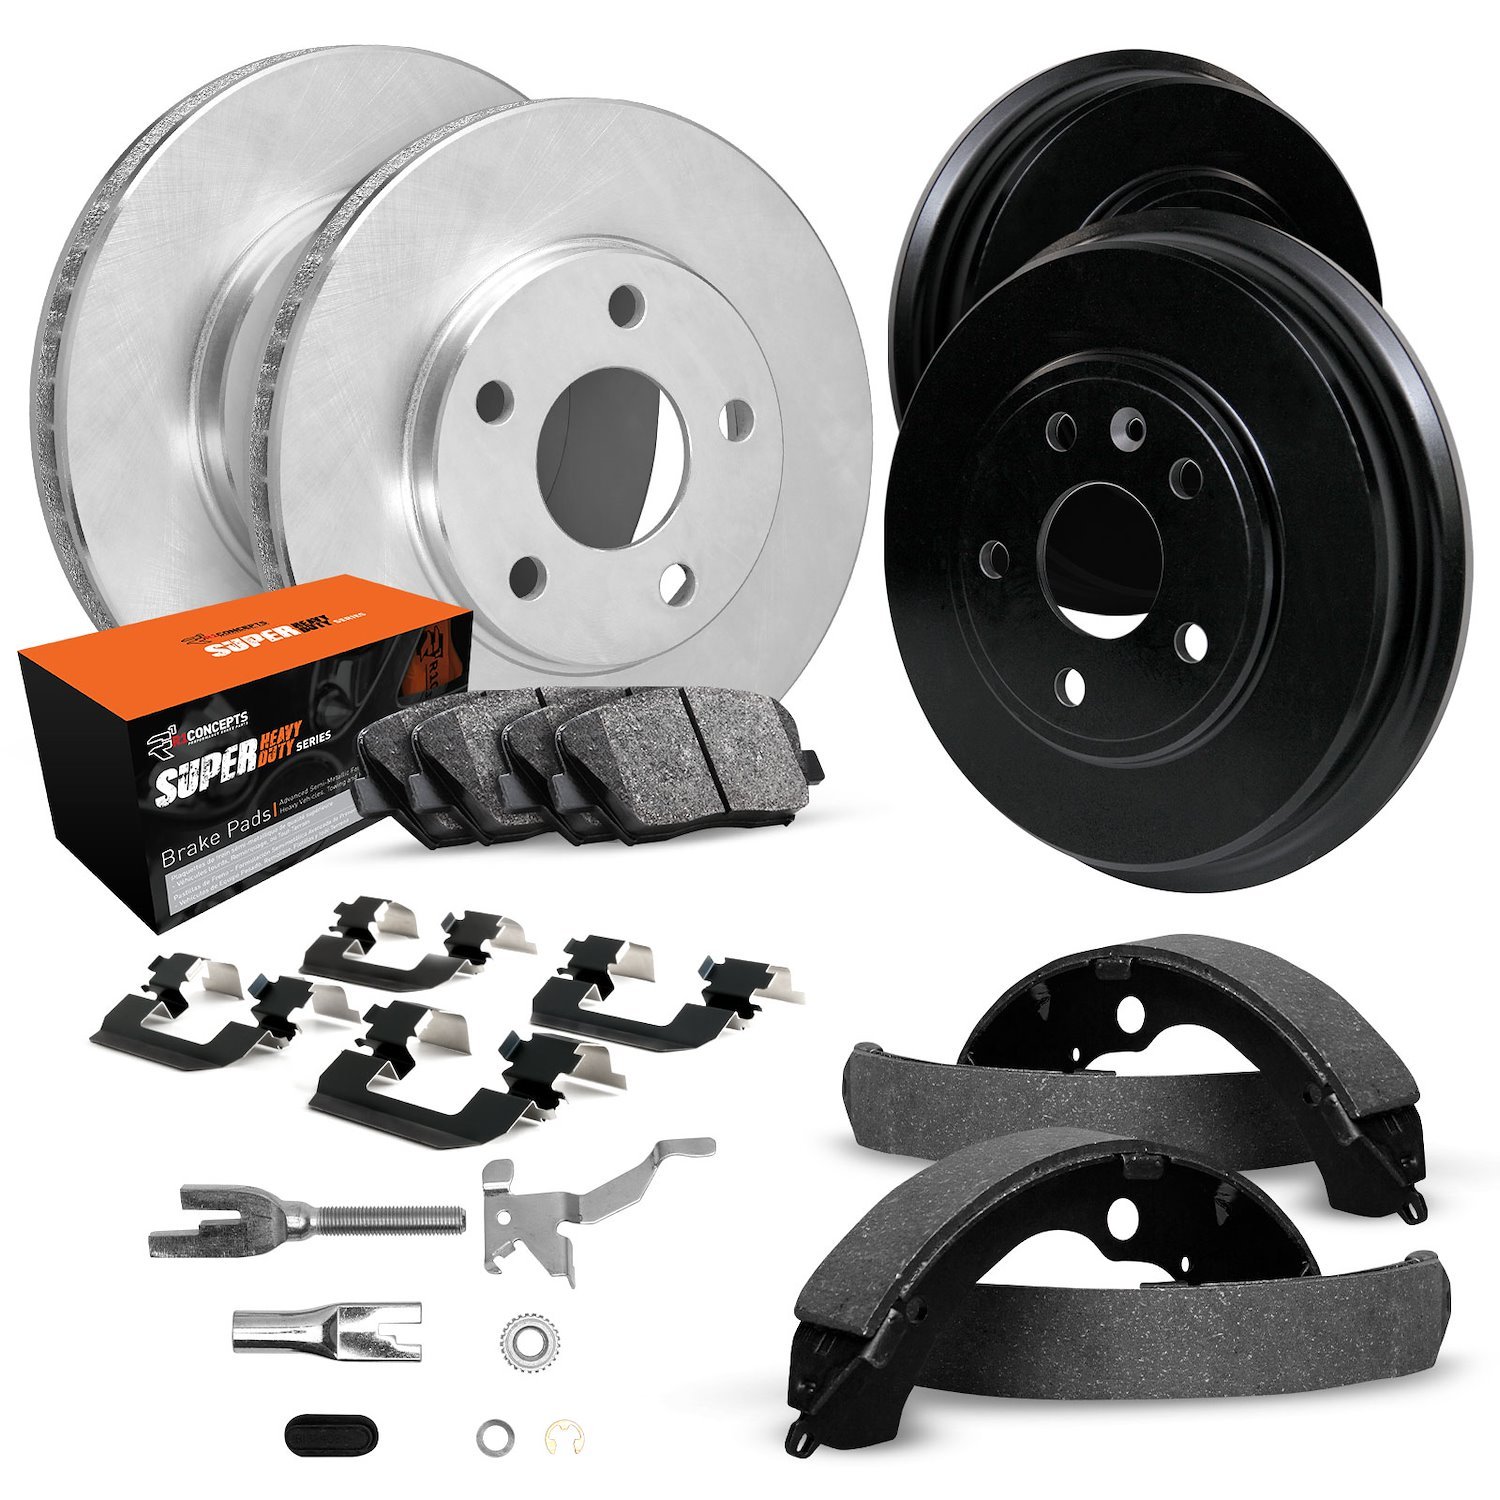 E-Line Blank Brake Rotor & Drum Set w/Super-Duty Pads, Shoes, Hardware, & Adjusters, 1977-1985 Ford/Lincoln/Mercury/Mazda